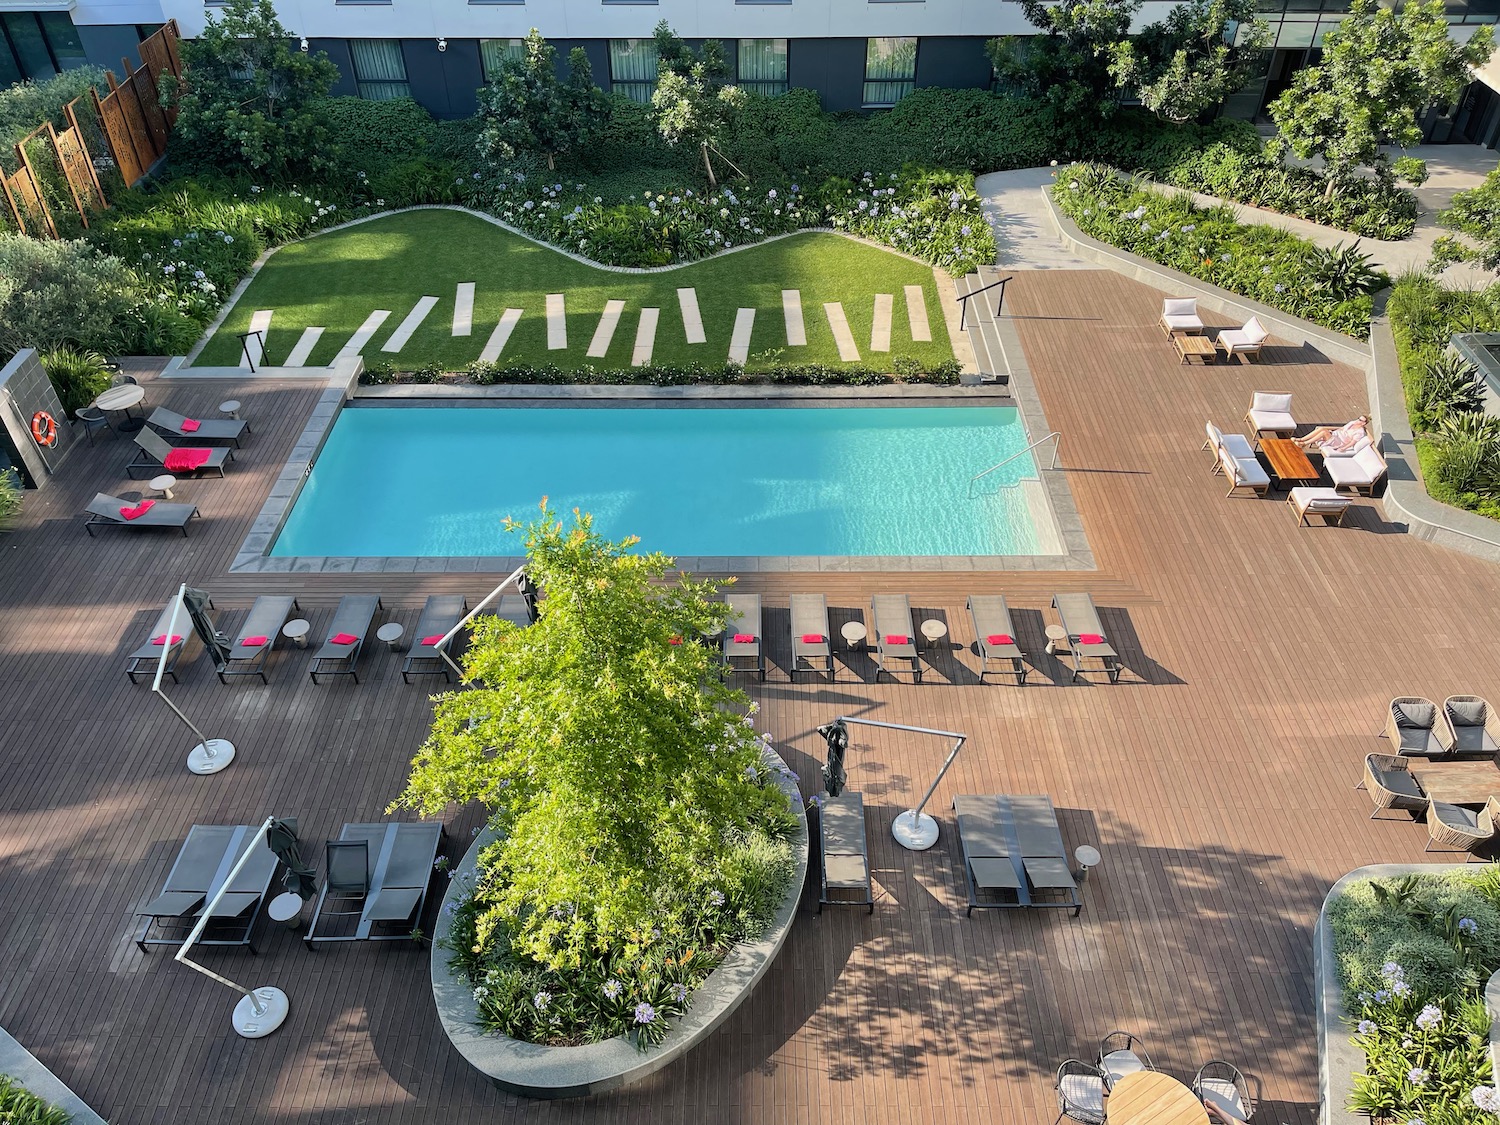 a pool and lounge chairs by a building